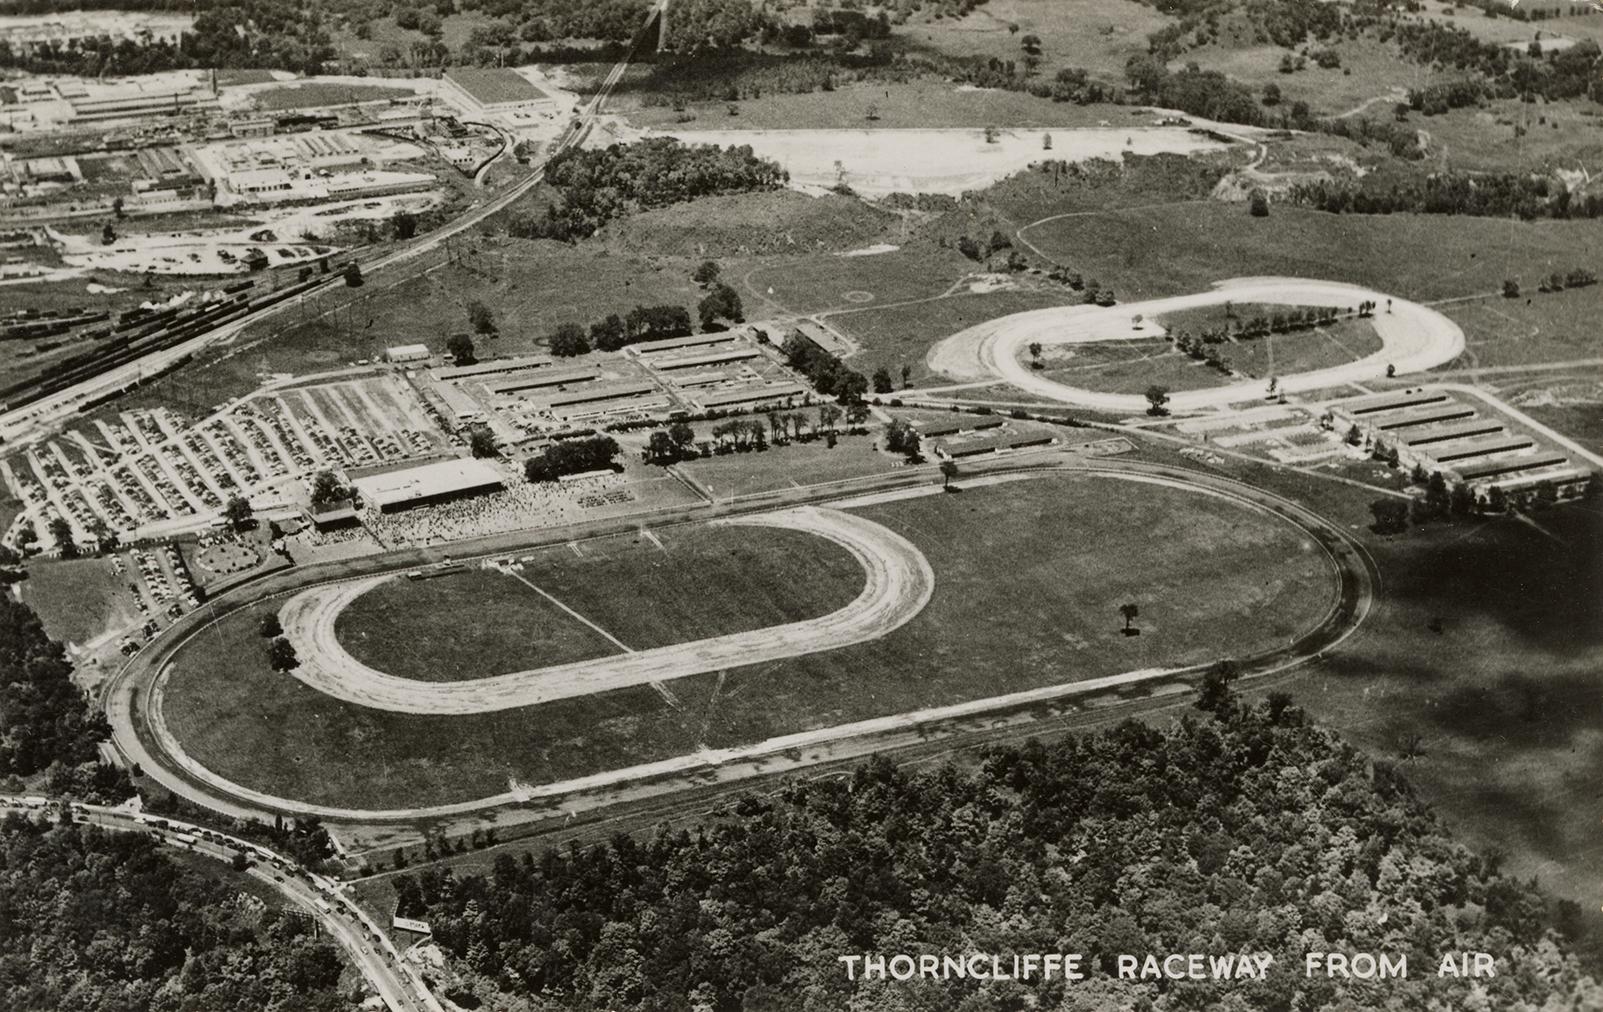 Black and white photo postcard depicting an aerial view of oval tracks. The caption on the bott ...